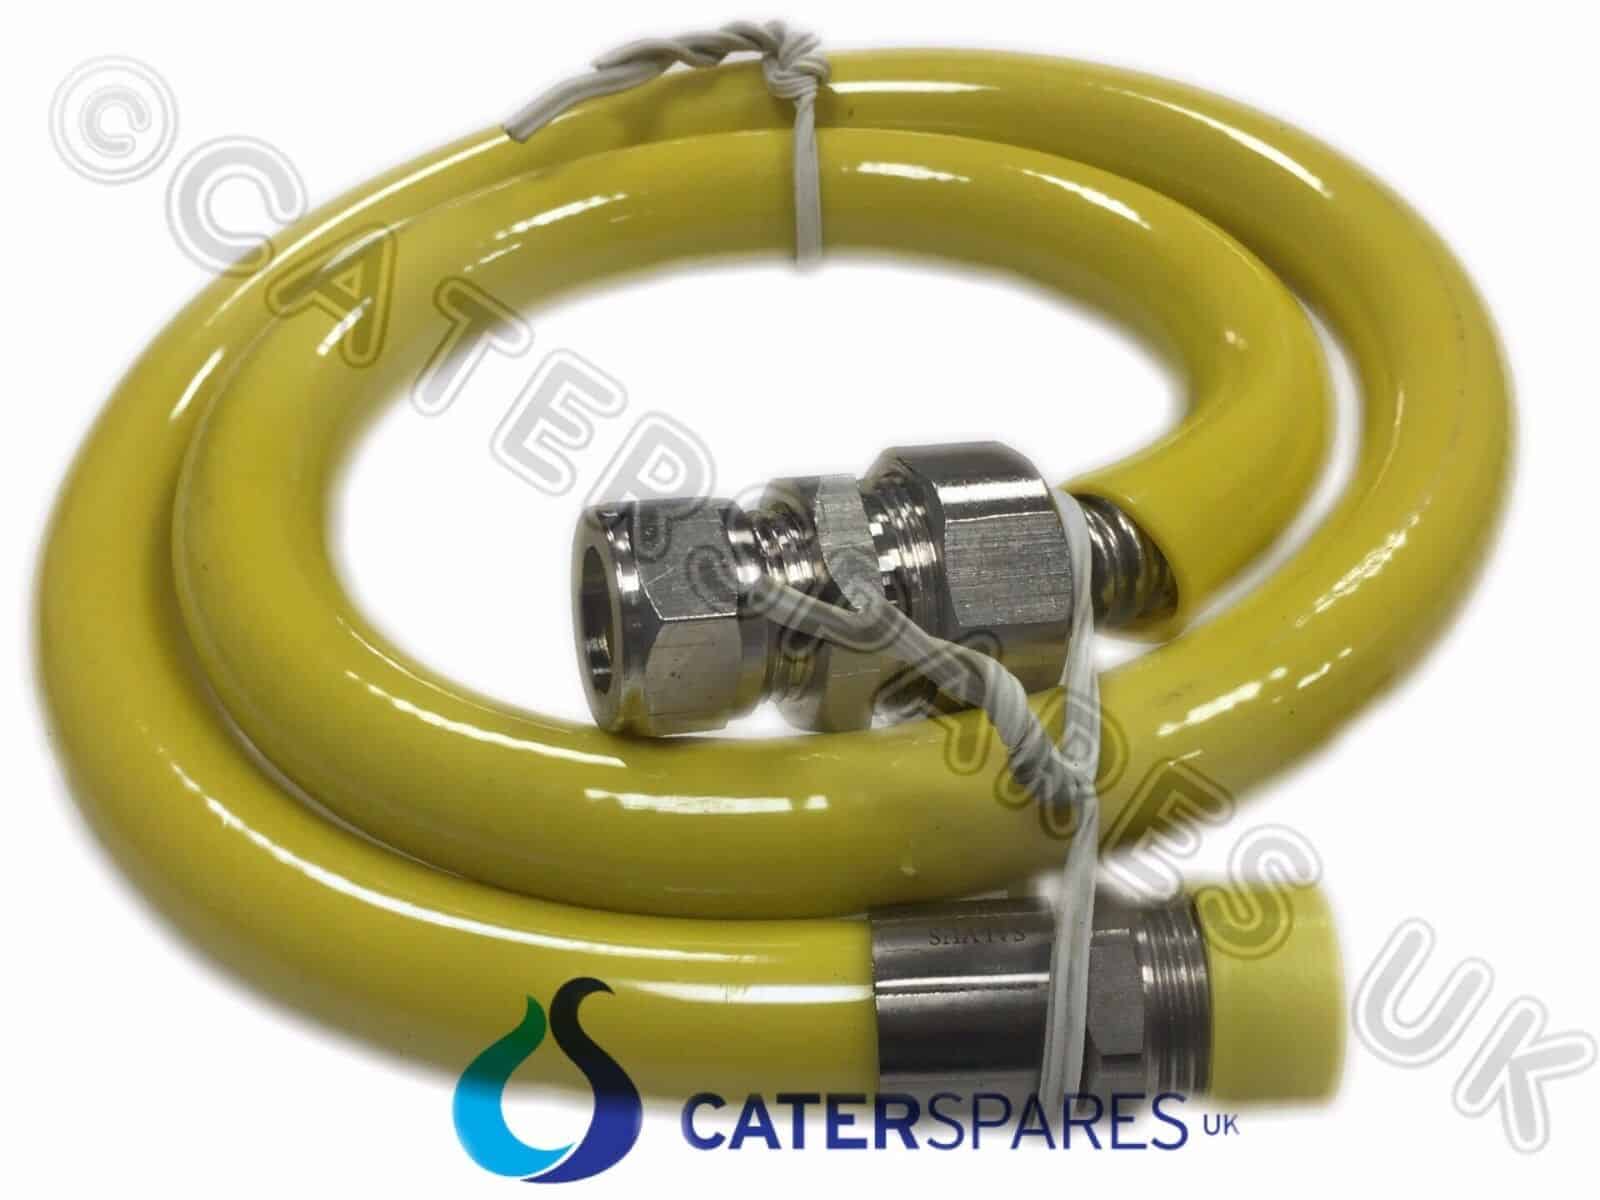 FLEXIBLE COMMERCIAL GAS HOSE 1M YELLOW CATERING CONNECTING PIPE 1/2" BSP 1000mm 